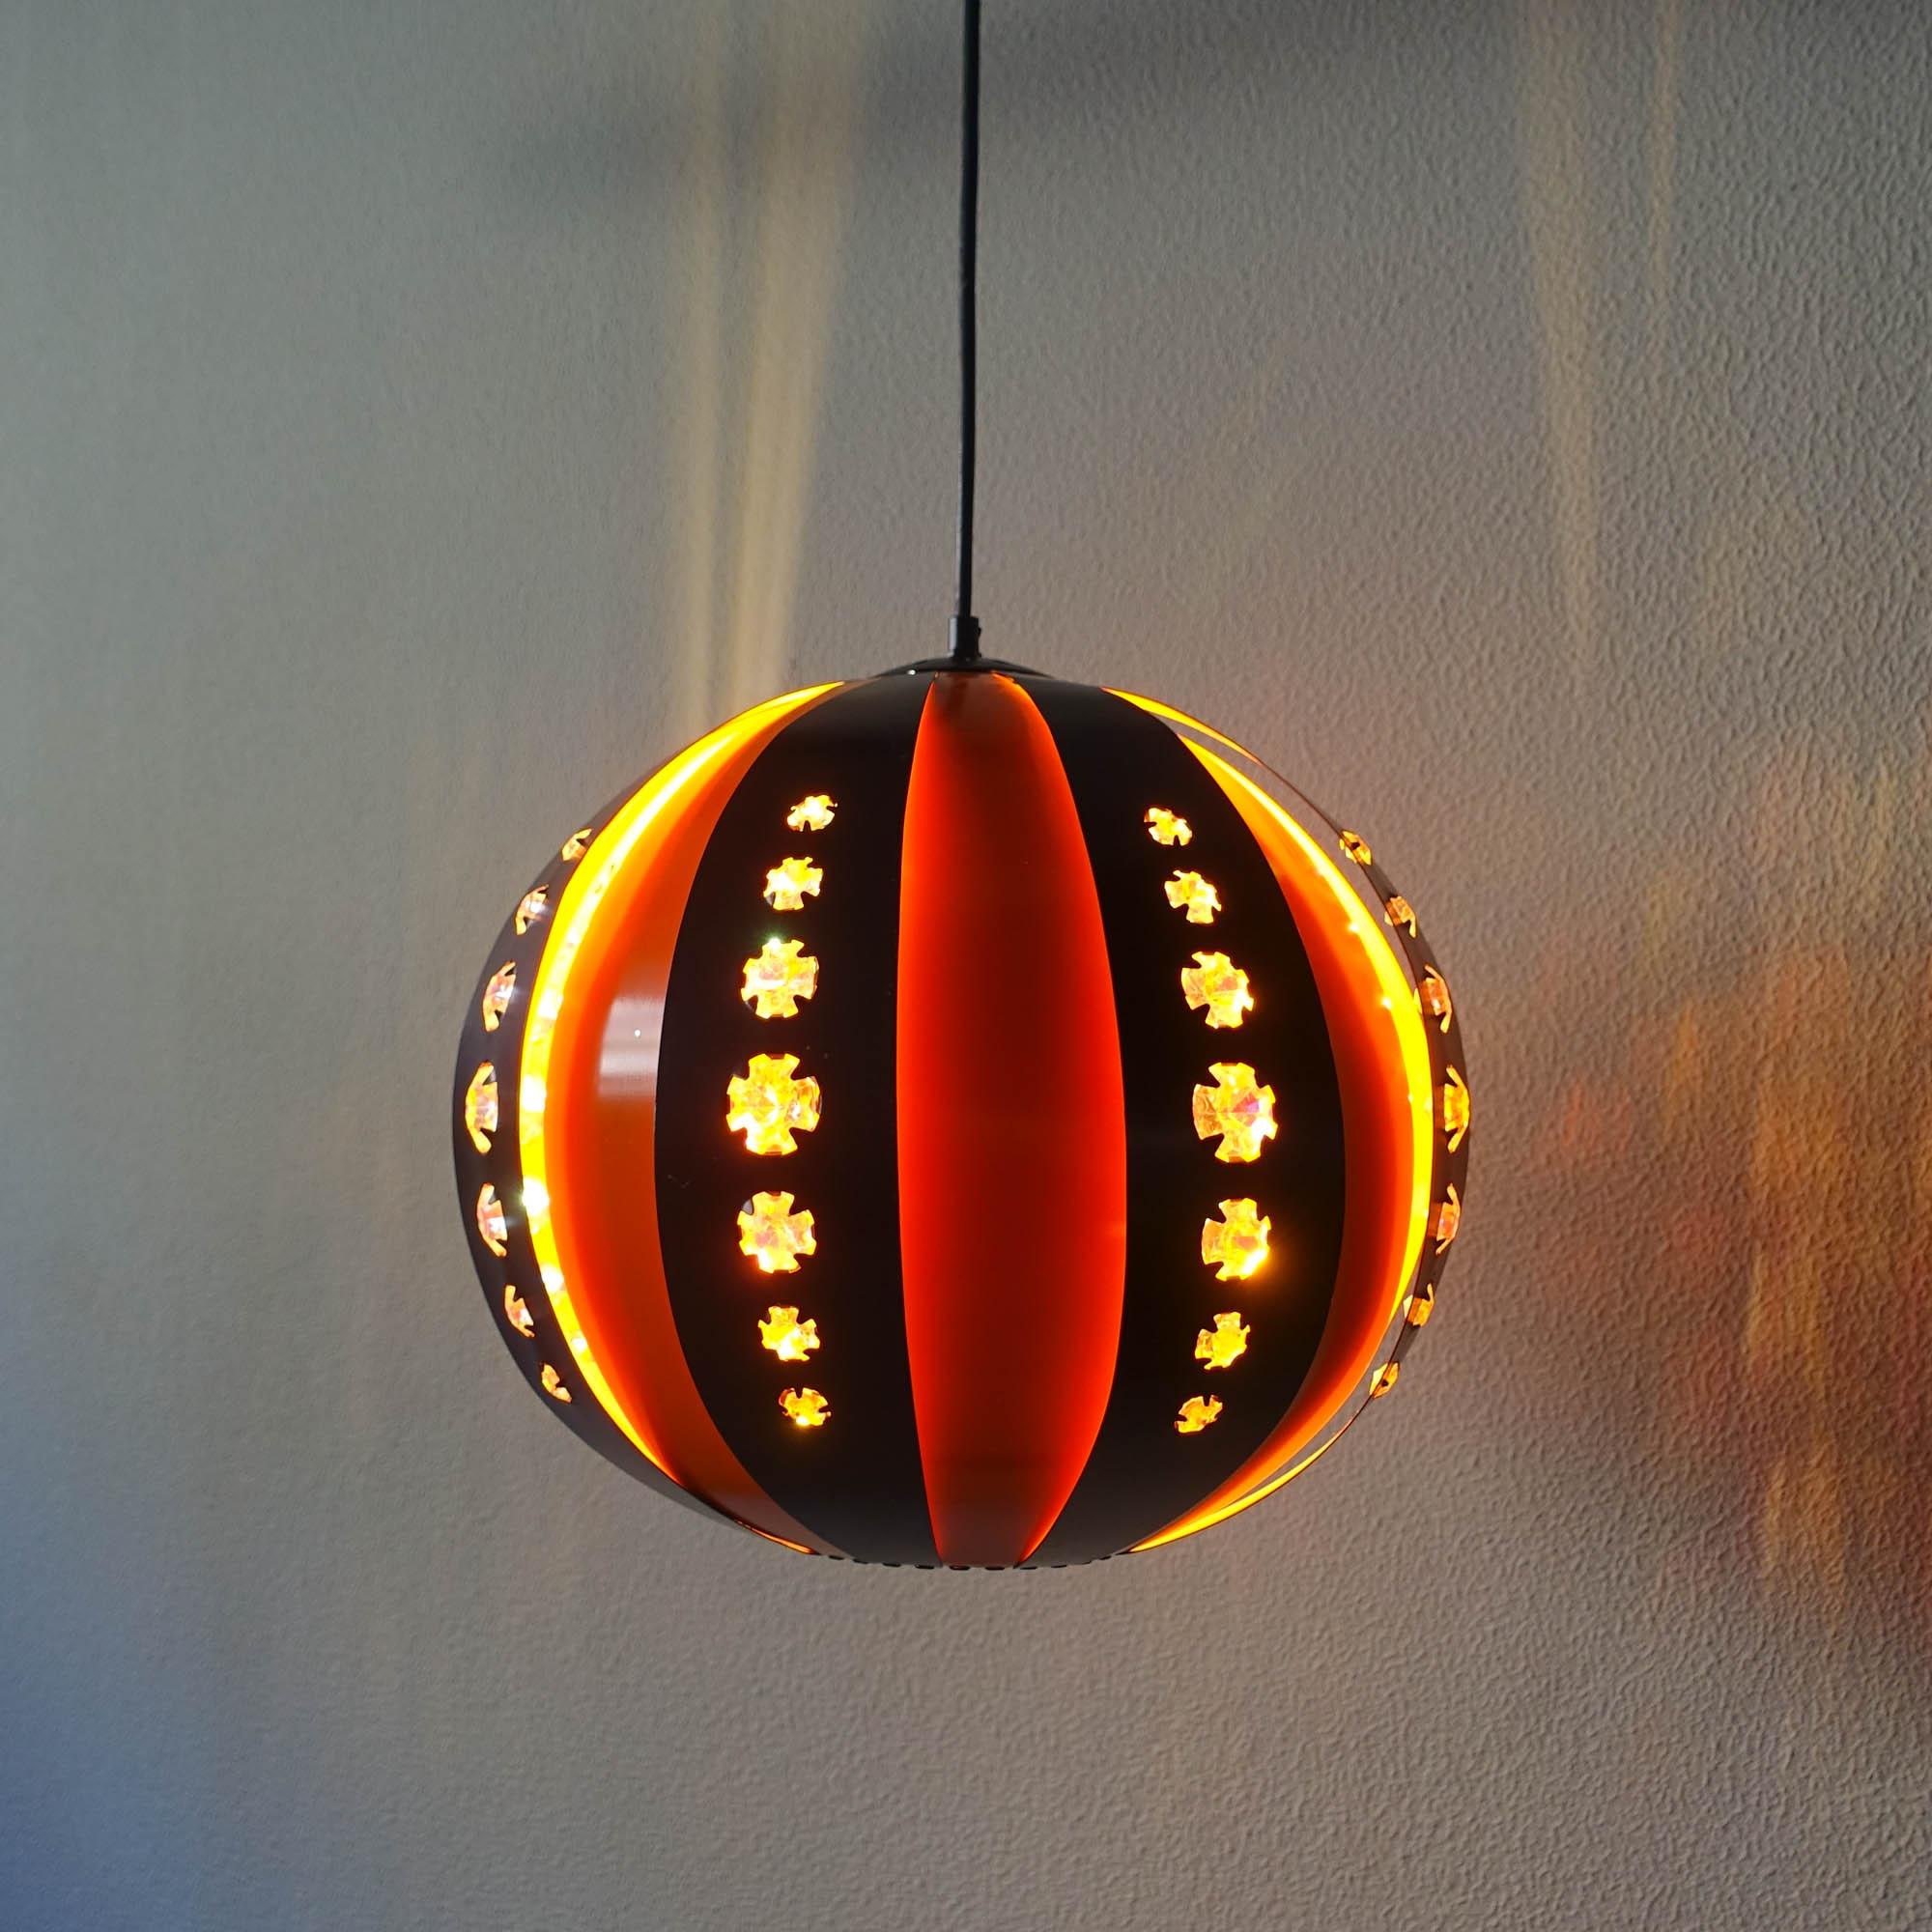 Werner Schou Pendant Light for Coronell Elektro, 1970's For Sale 5